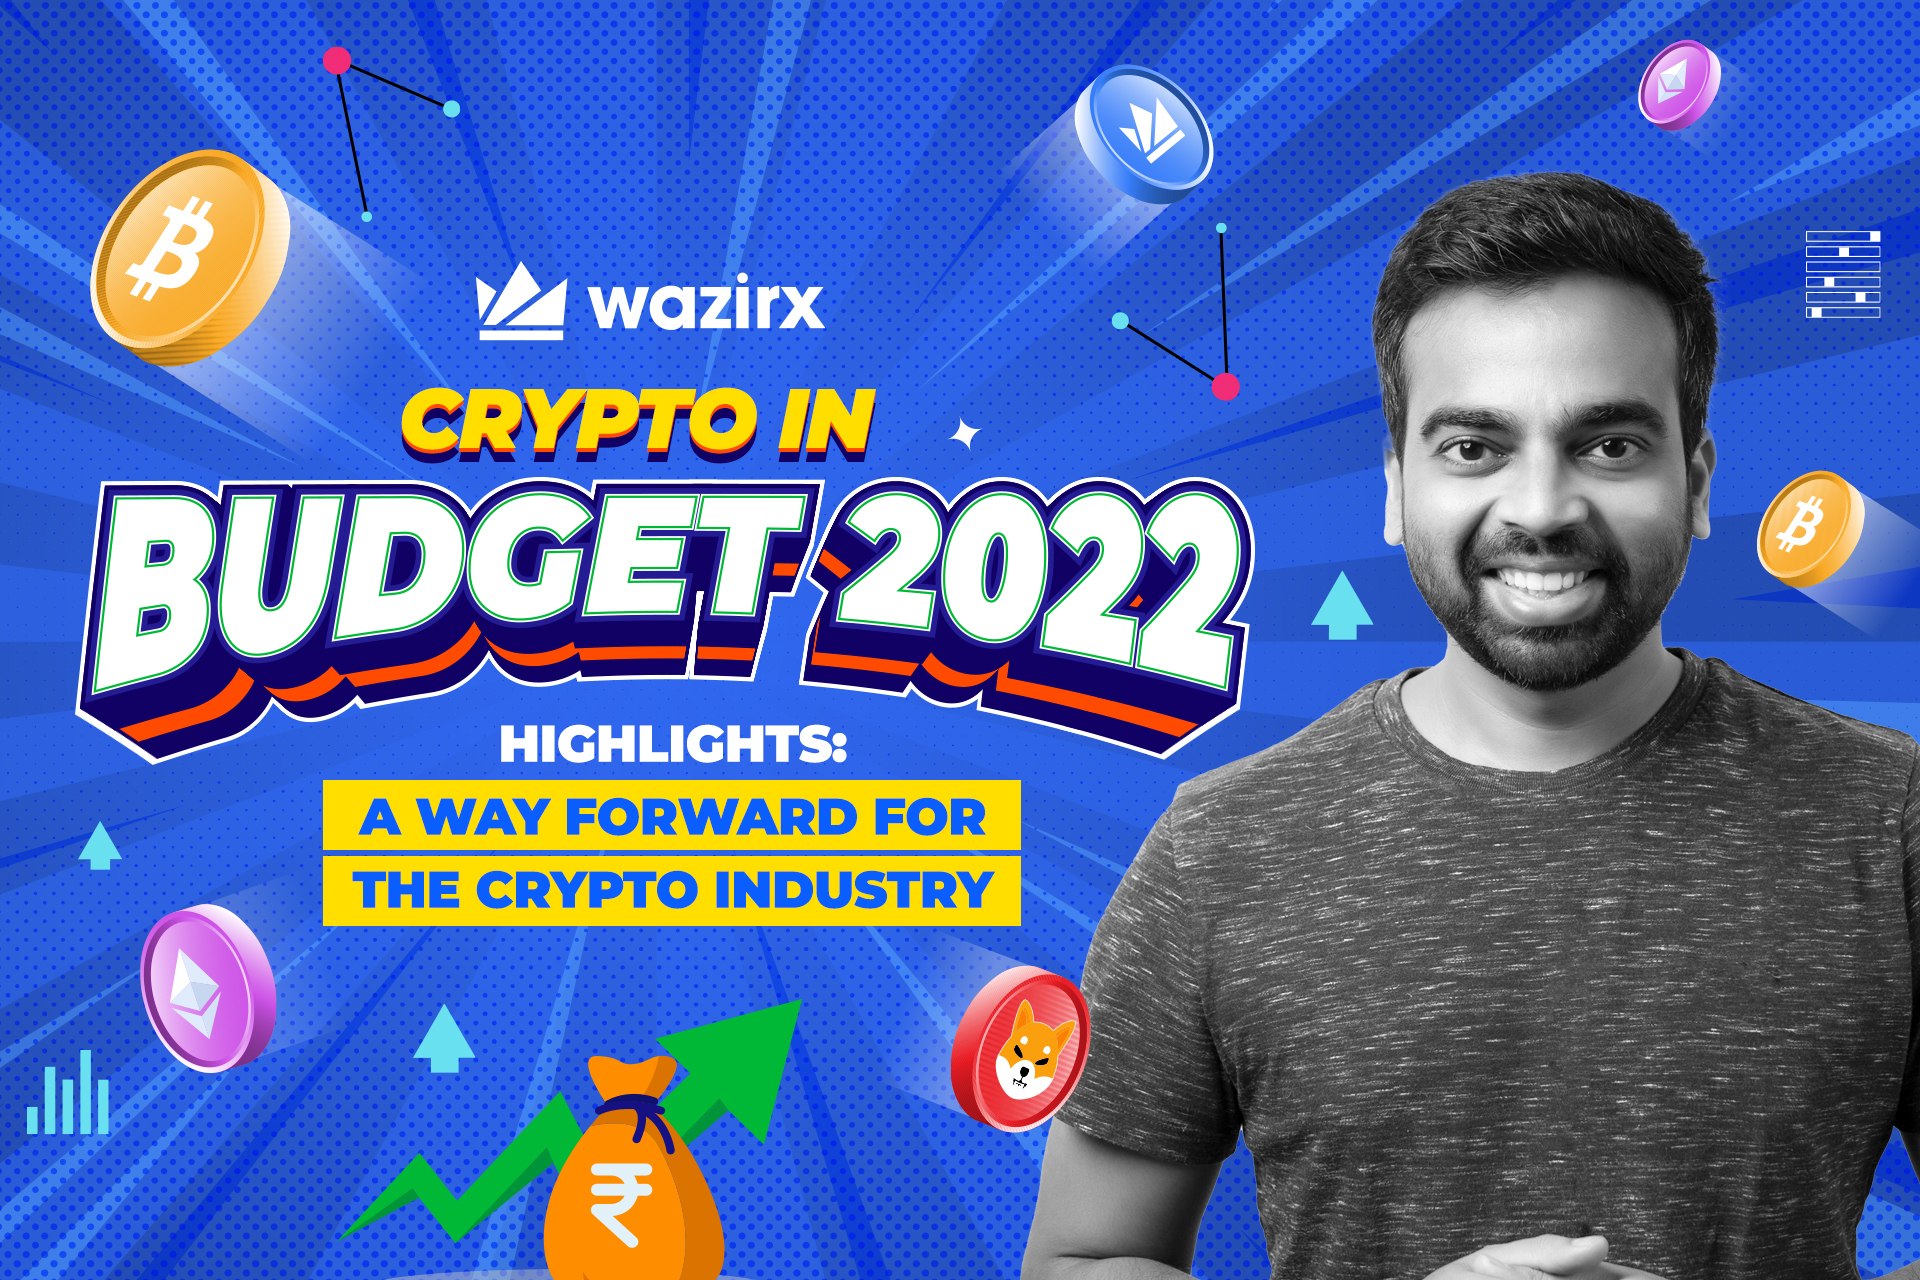 Budget 2022 - Highlights: A way forward for the Crypto Industry